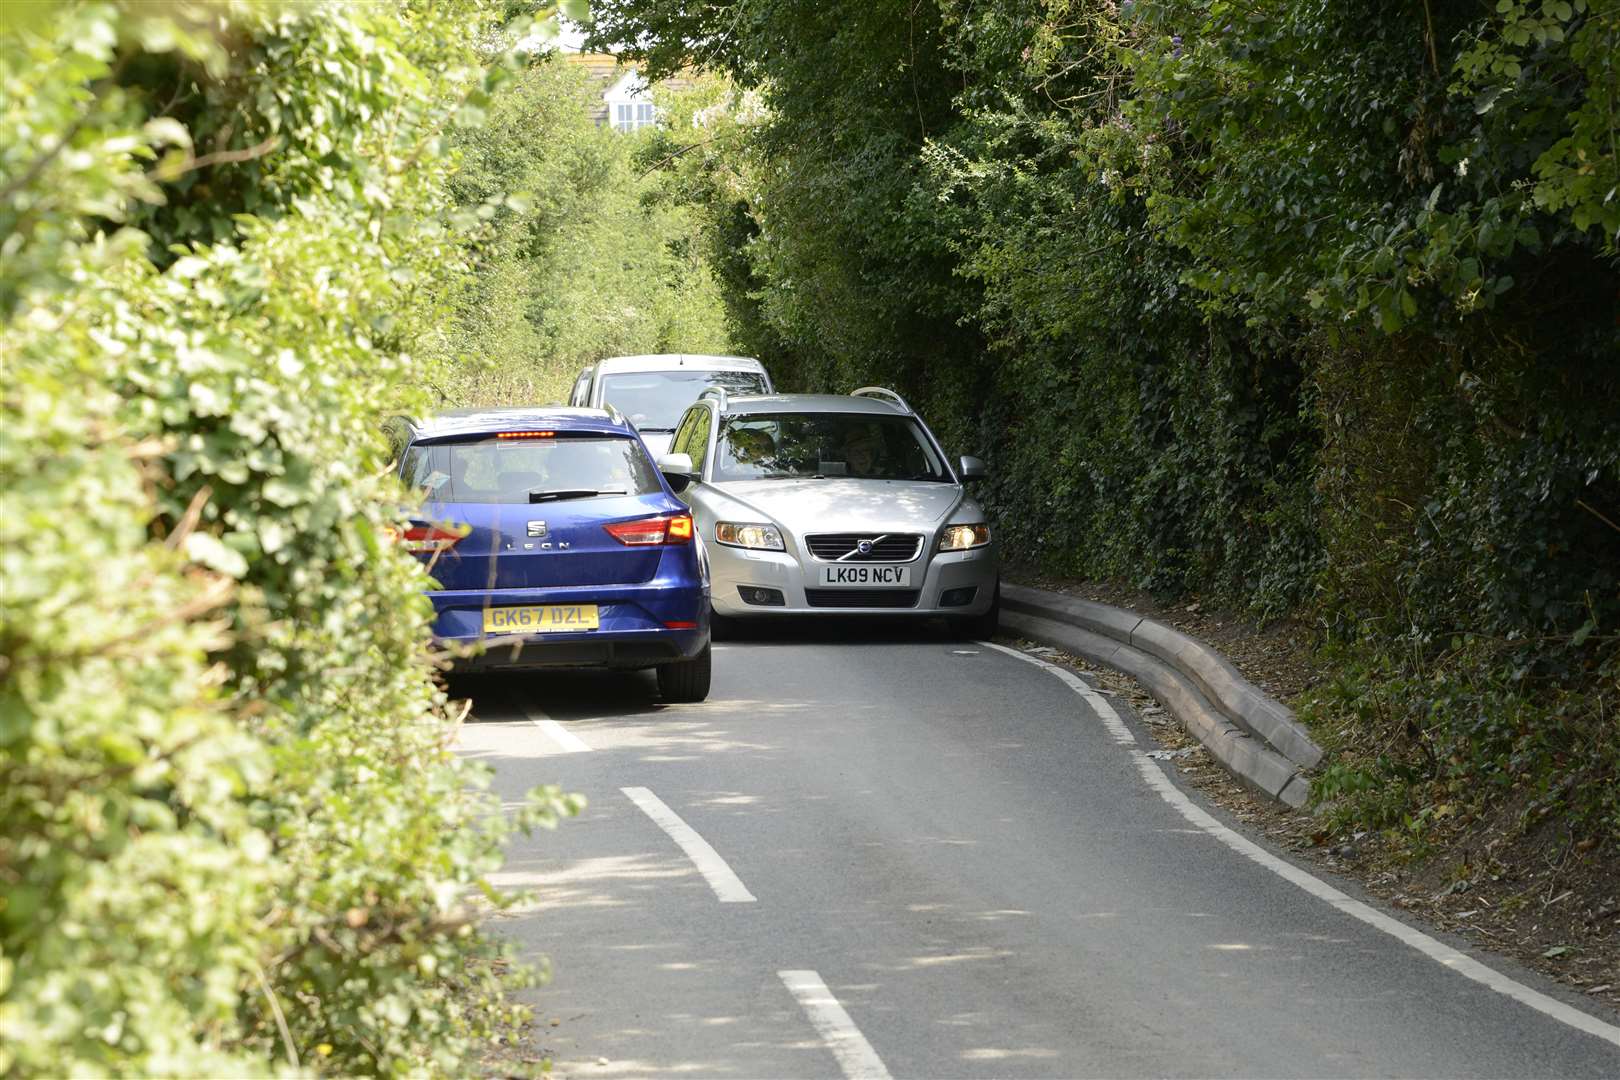 Church Lane in Seasalter, Whitstable, is said to be a motorist's nightmare